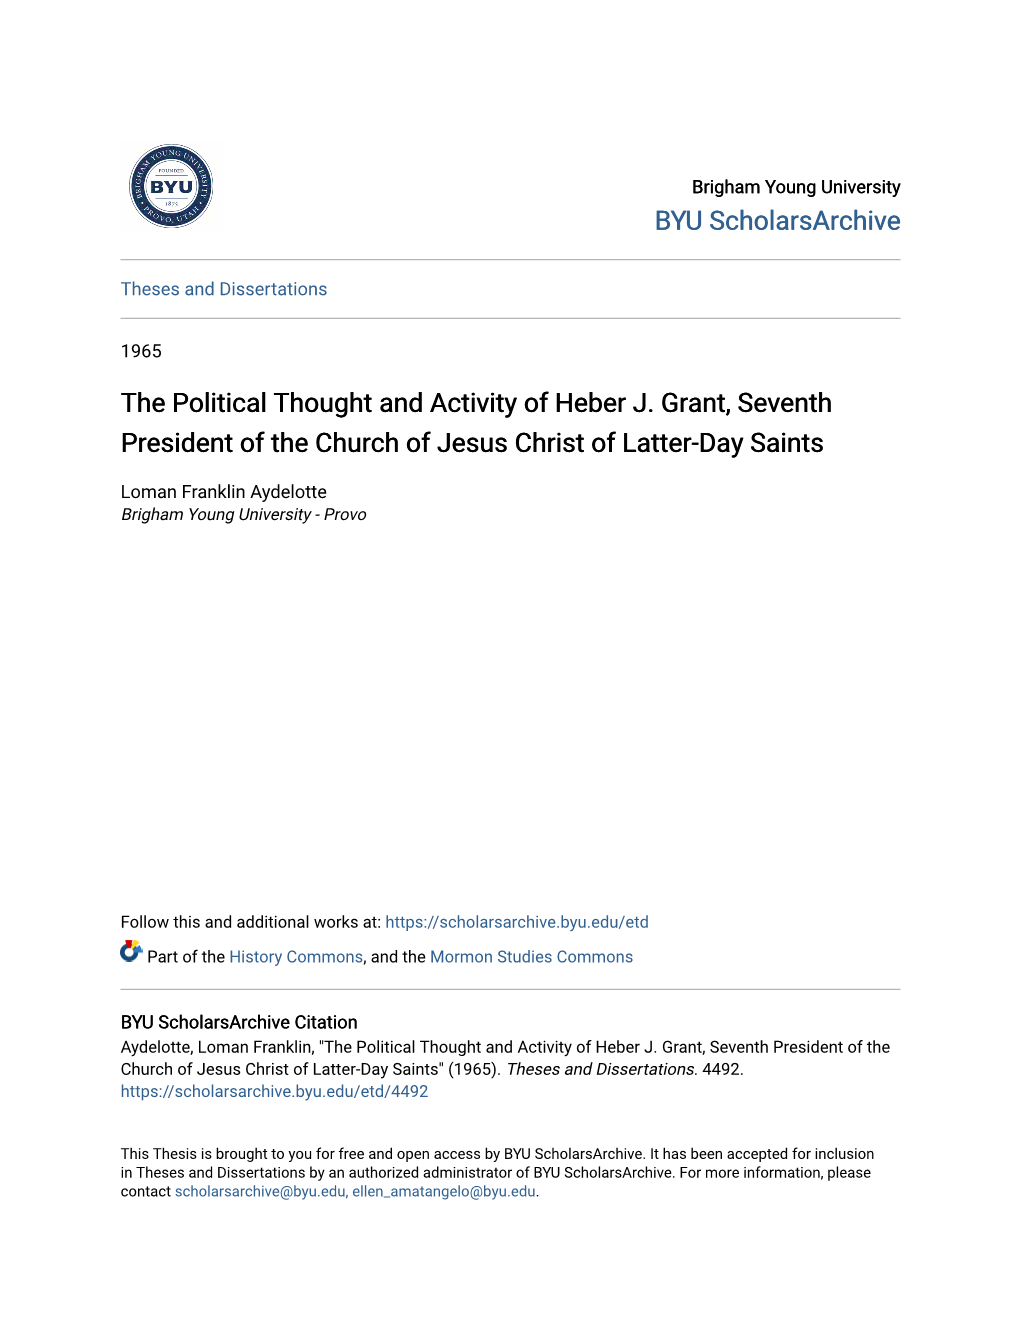 The Political Thought and Activity of Heber J. Grant, Seventh President of the Church of Jesus Christ of Latter-Day Saints